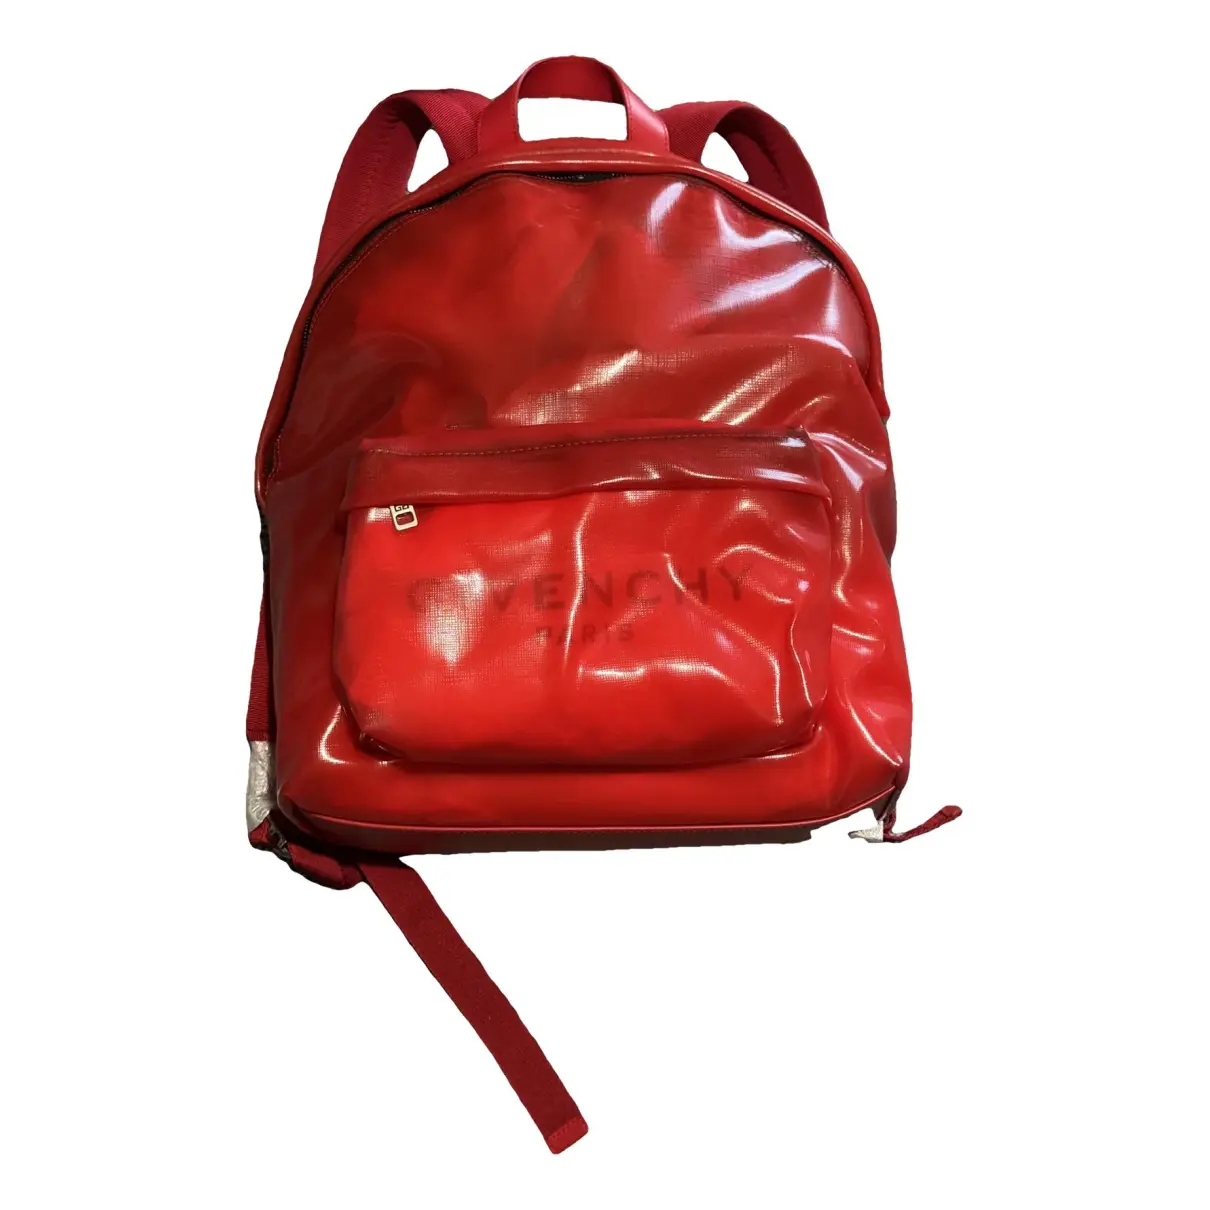 Patent leather backpack